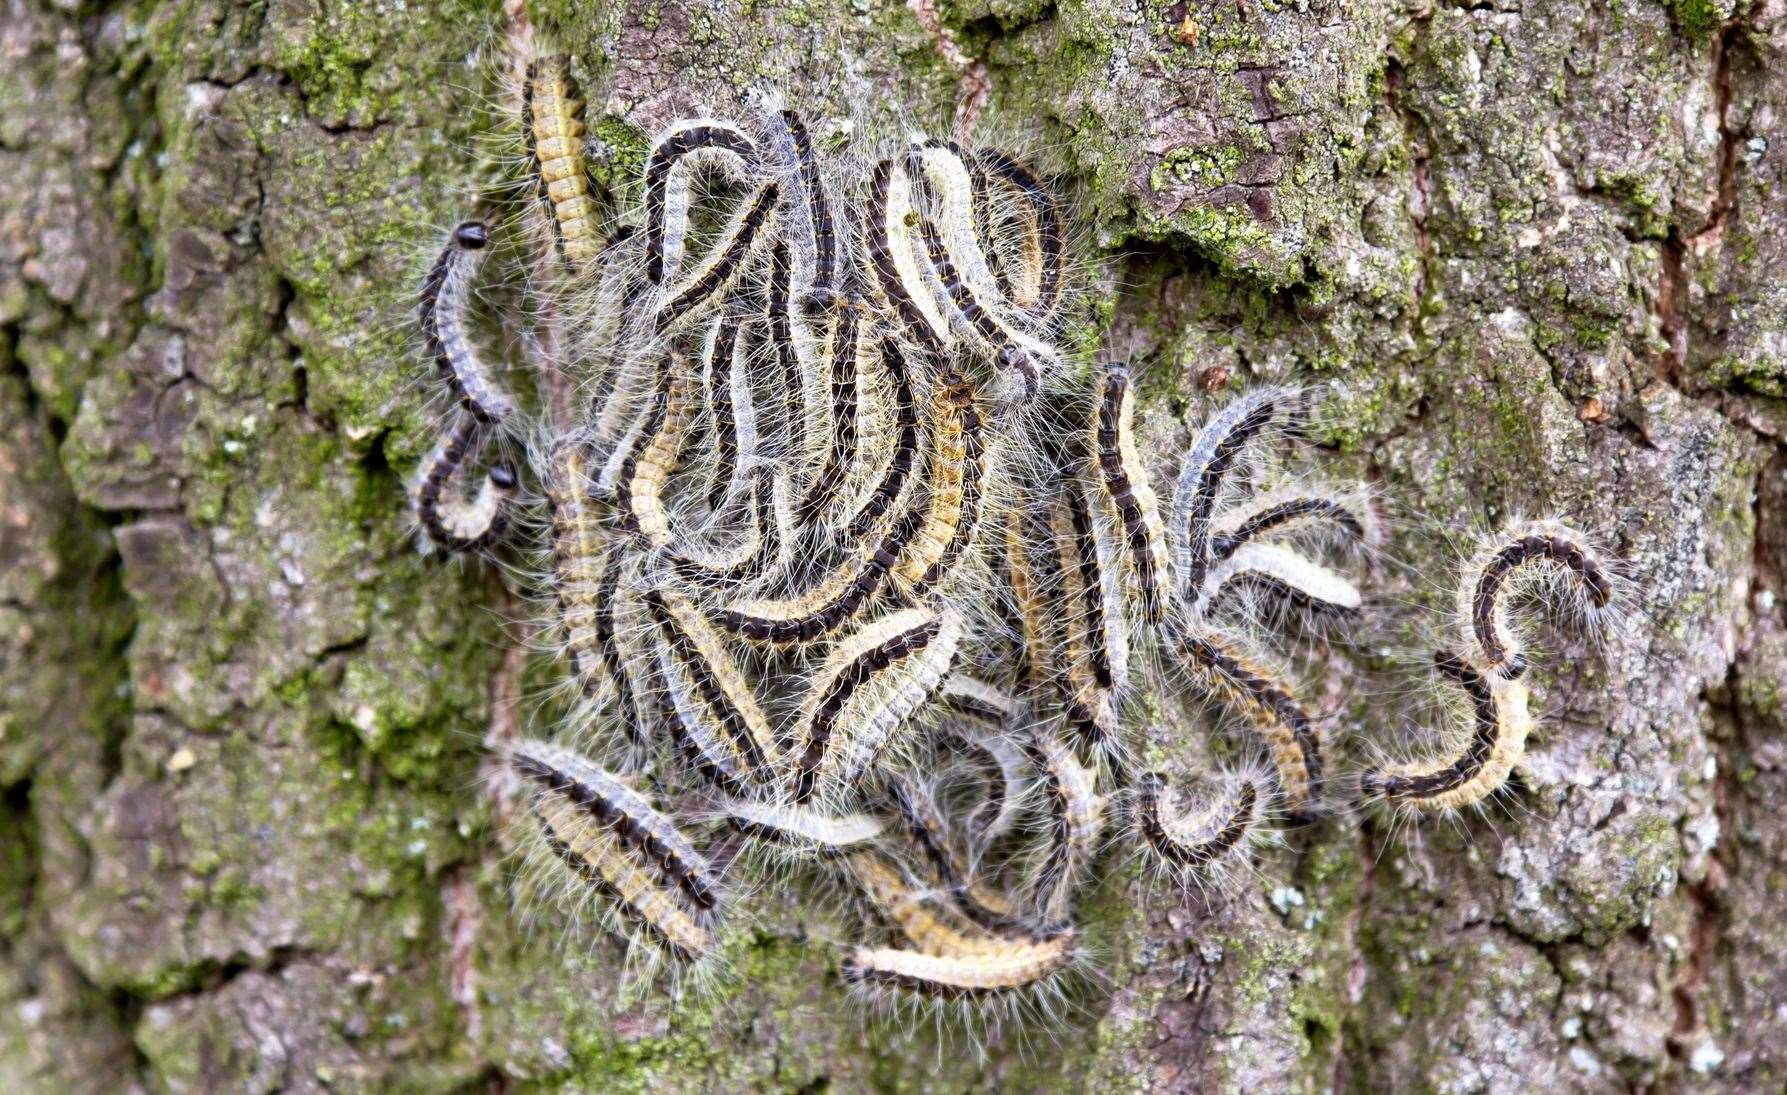 The Forestry Commission says people should not touch the hairy caterpillar